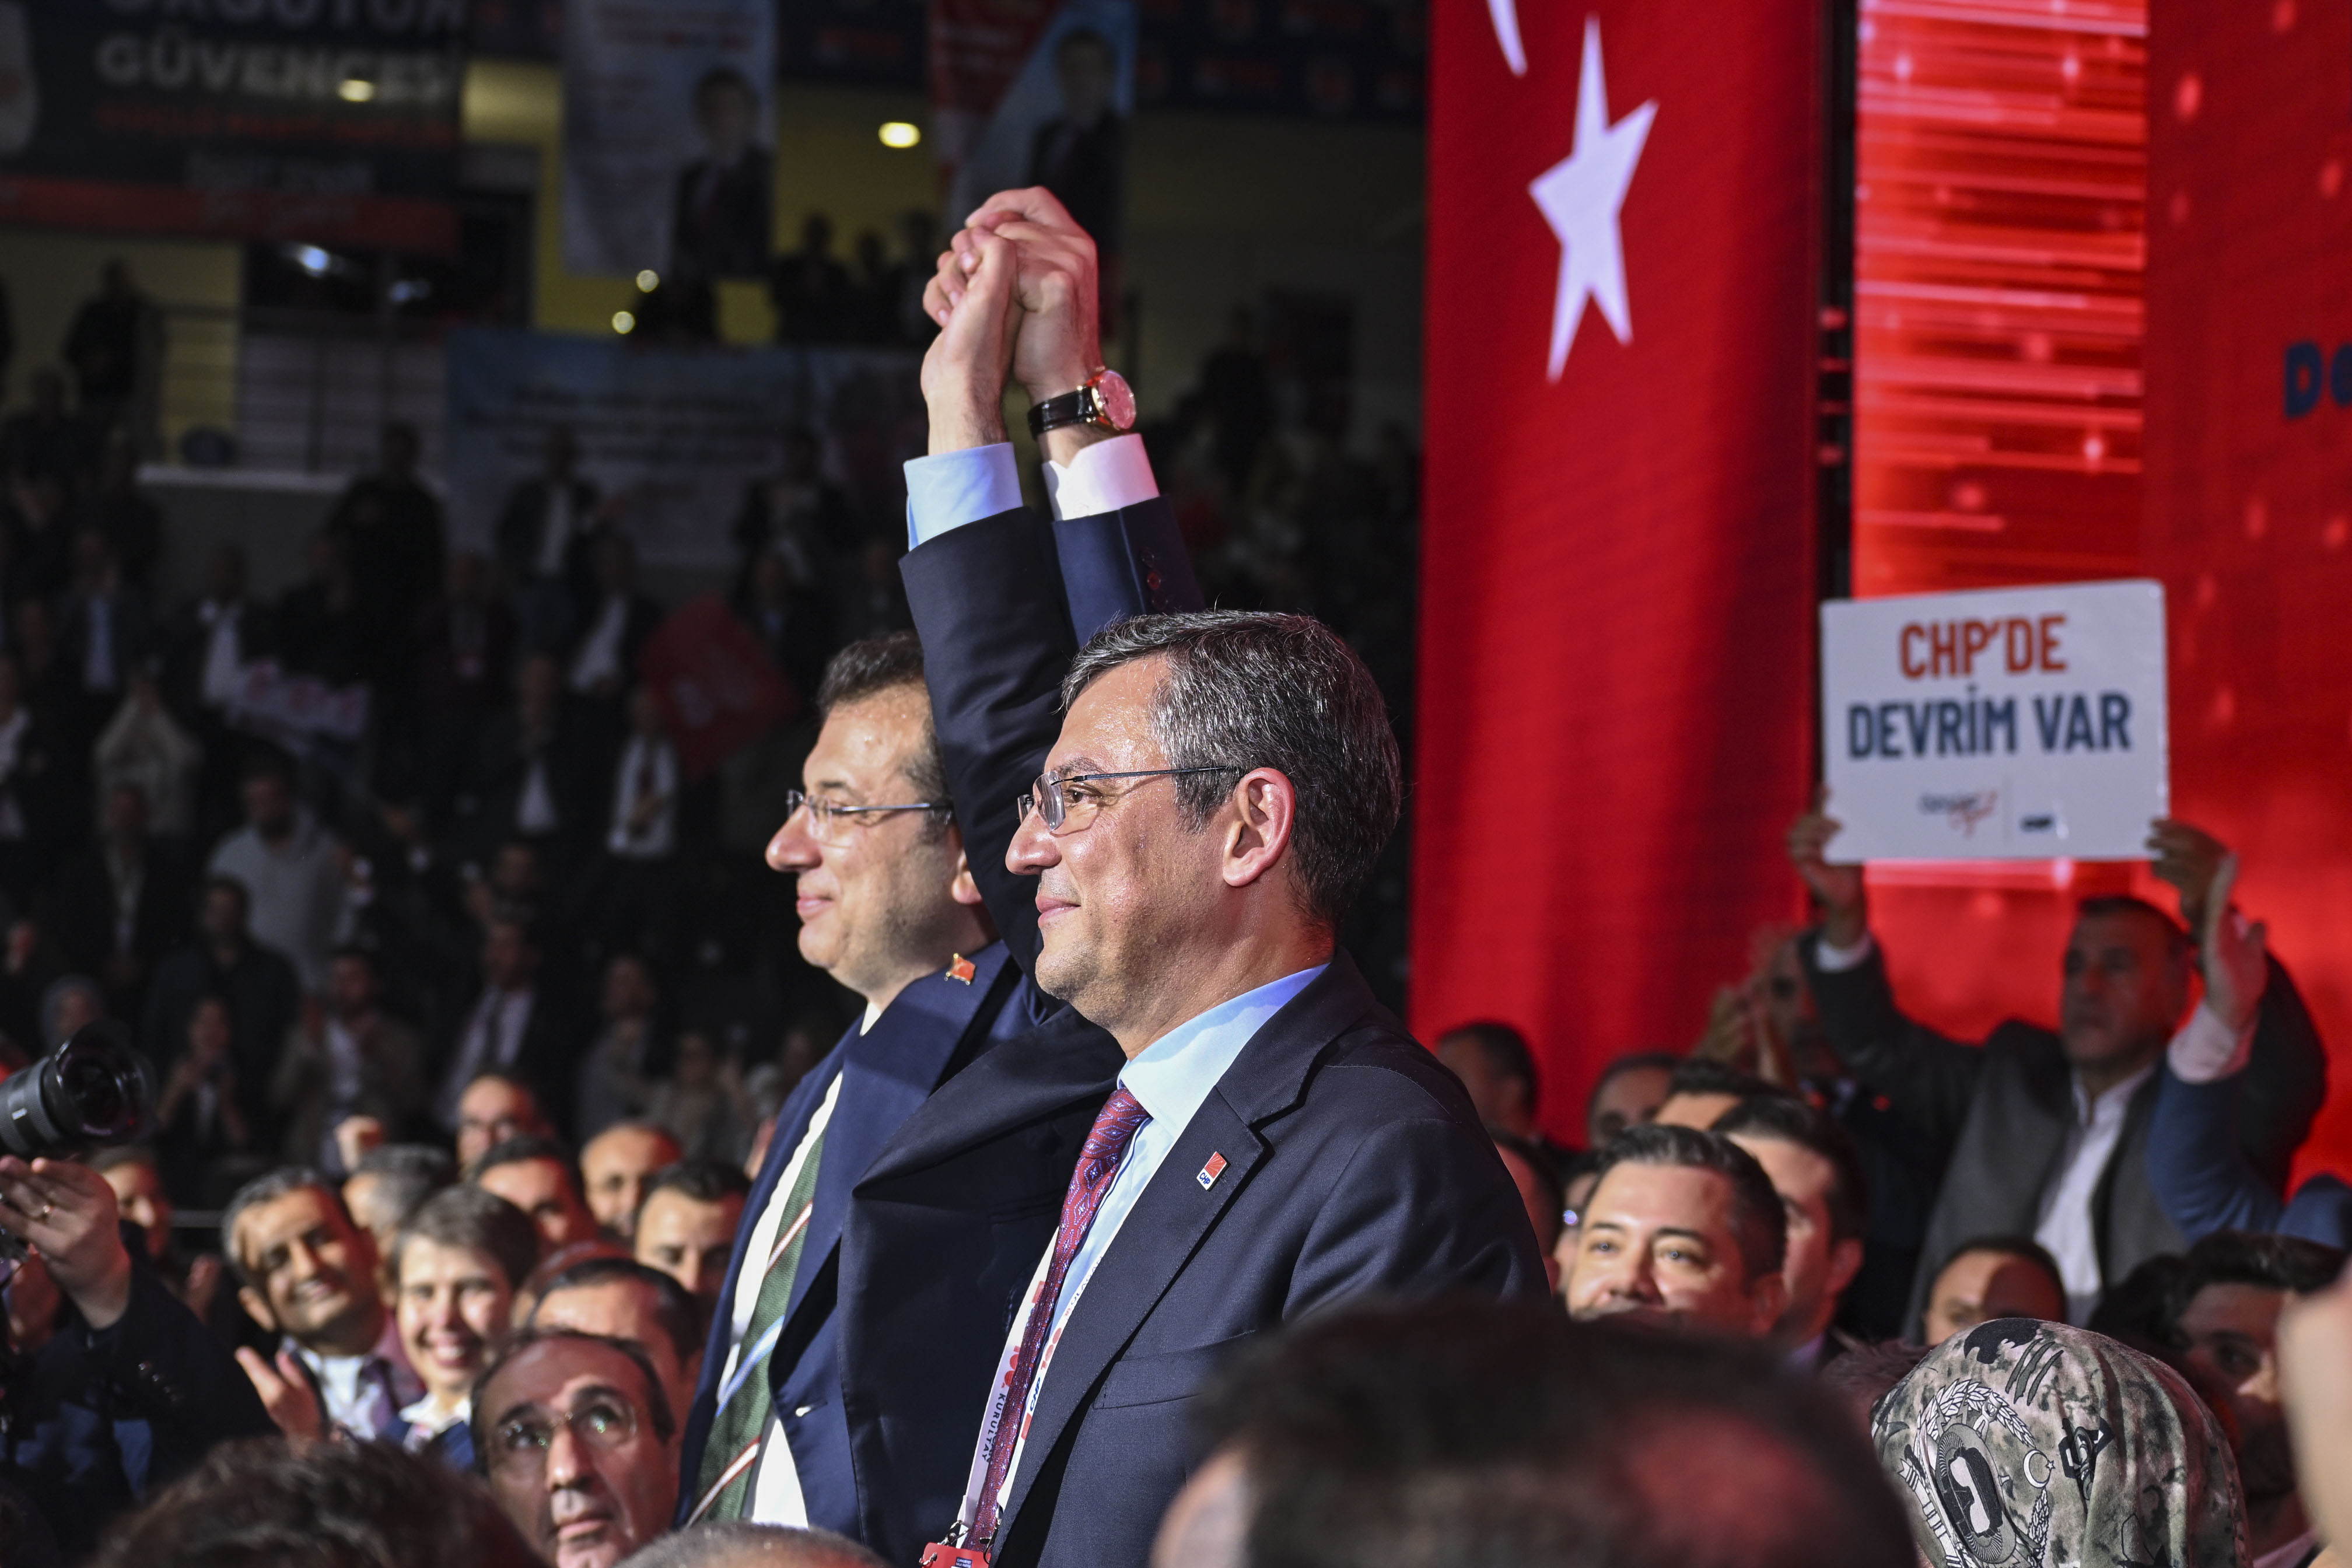 aa-20231105-32663702-32663701-newly-elected-republican-peoples-party-chairman-ozgur-ozel.jpg